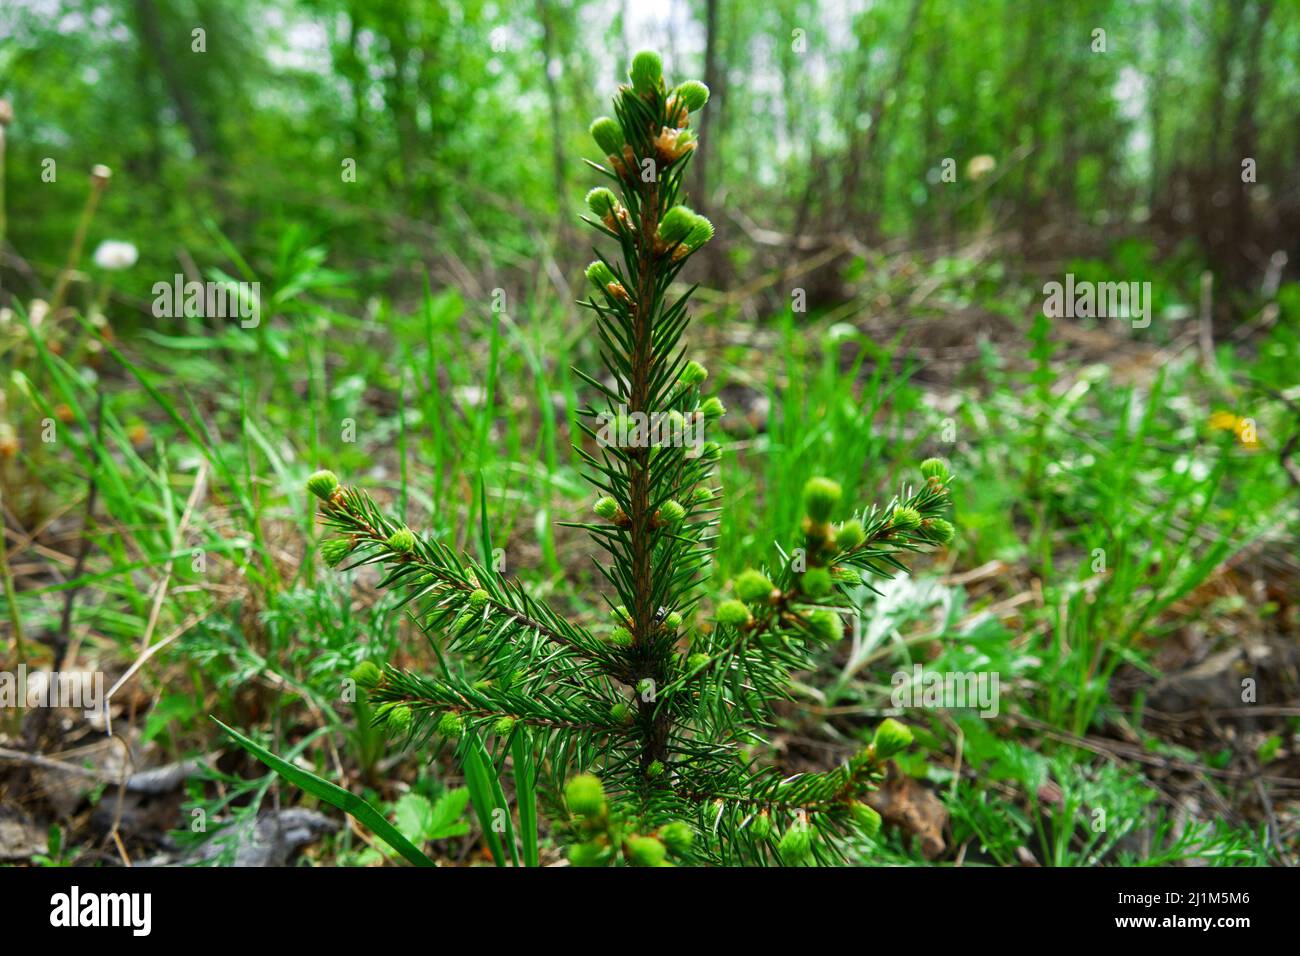 Forest science, dendrology, afforestation. Young European Spruce with growth points at the ends of the branches (apical bud, browse). Young shoots of Stock Photo